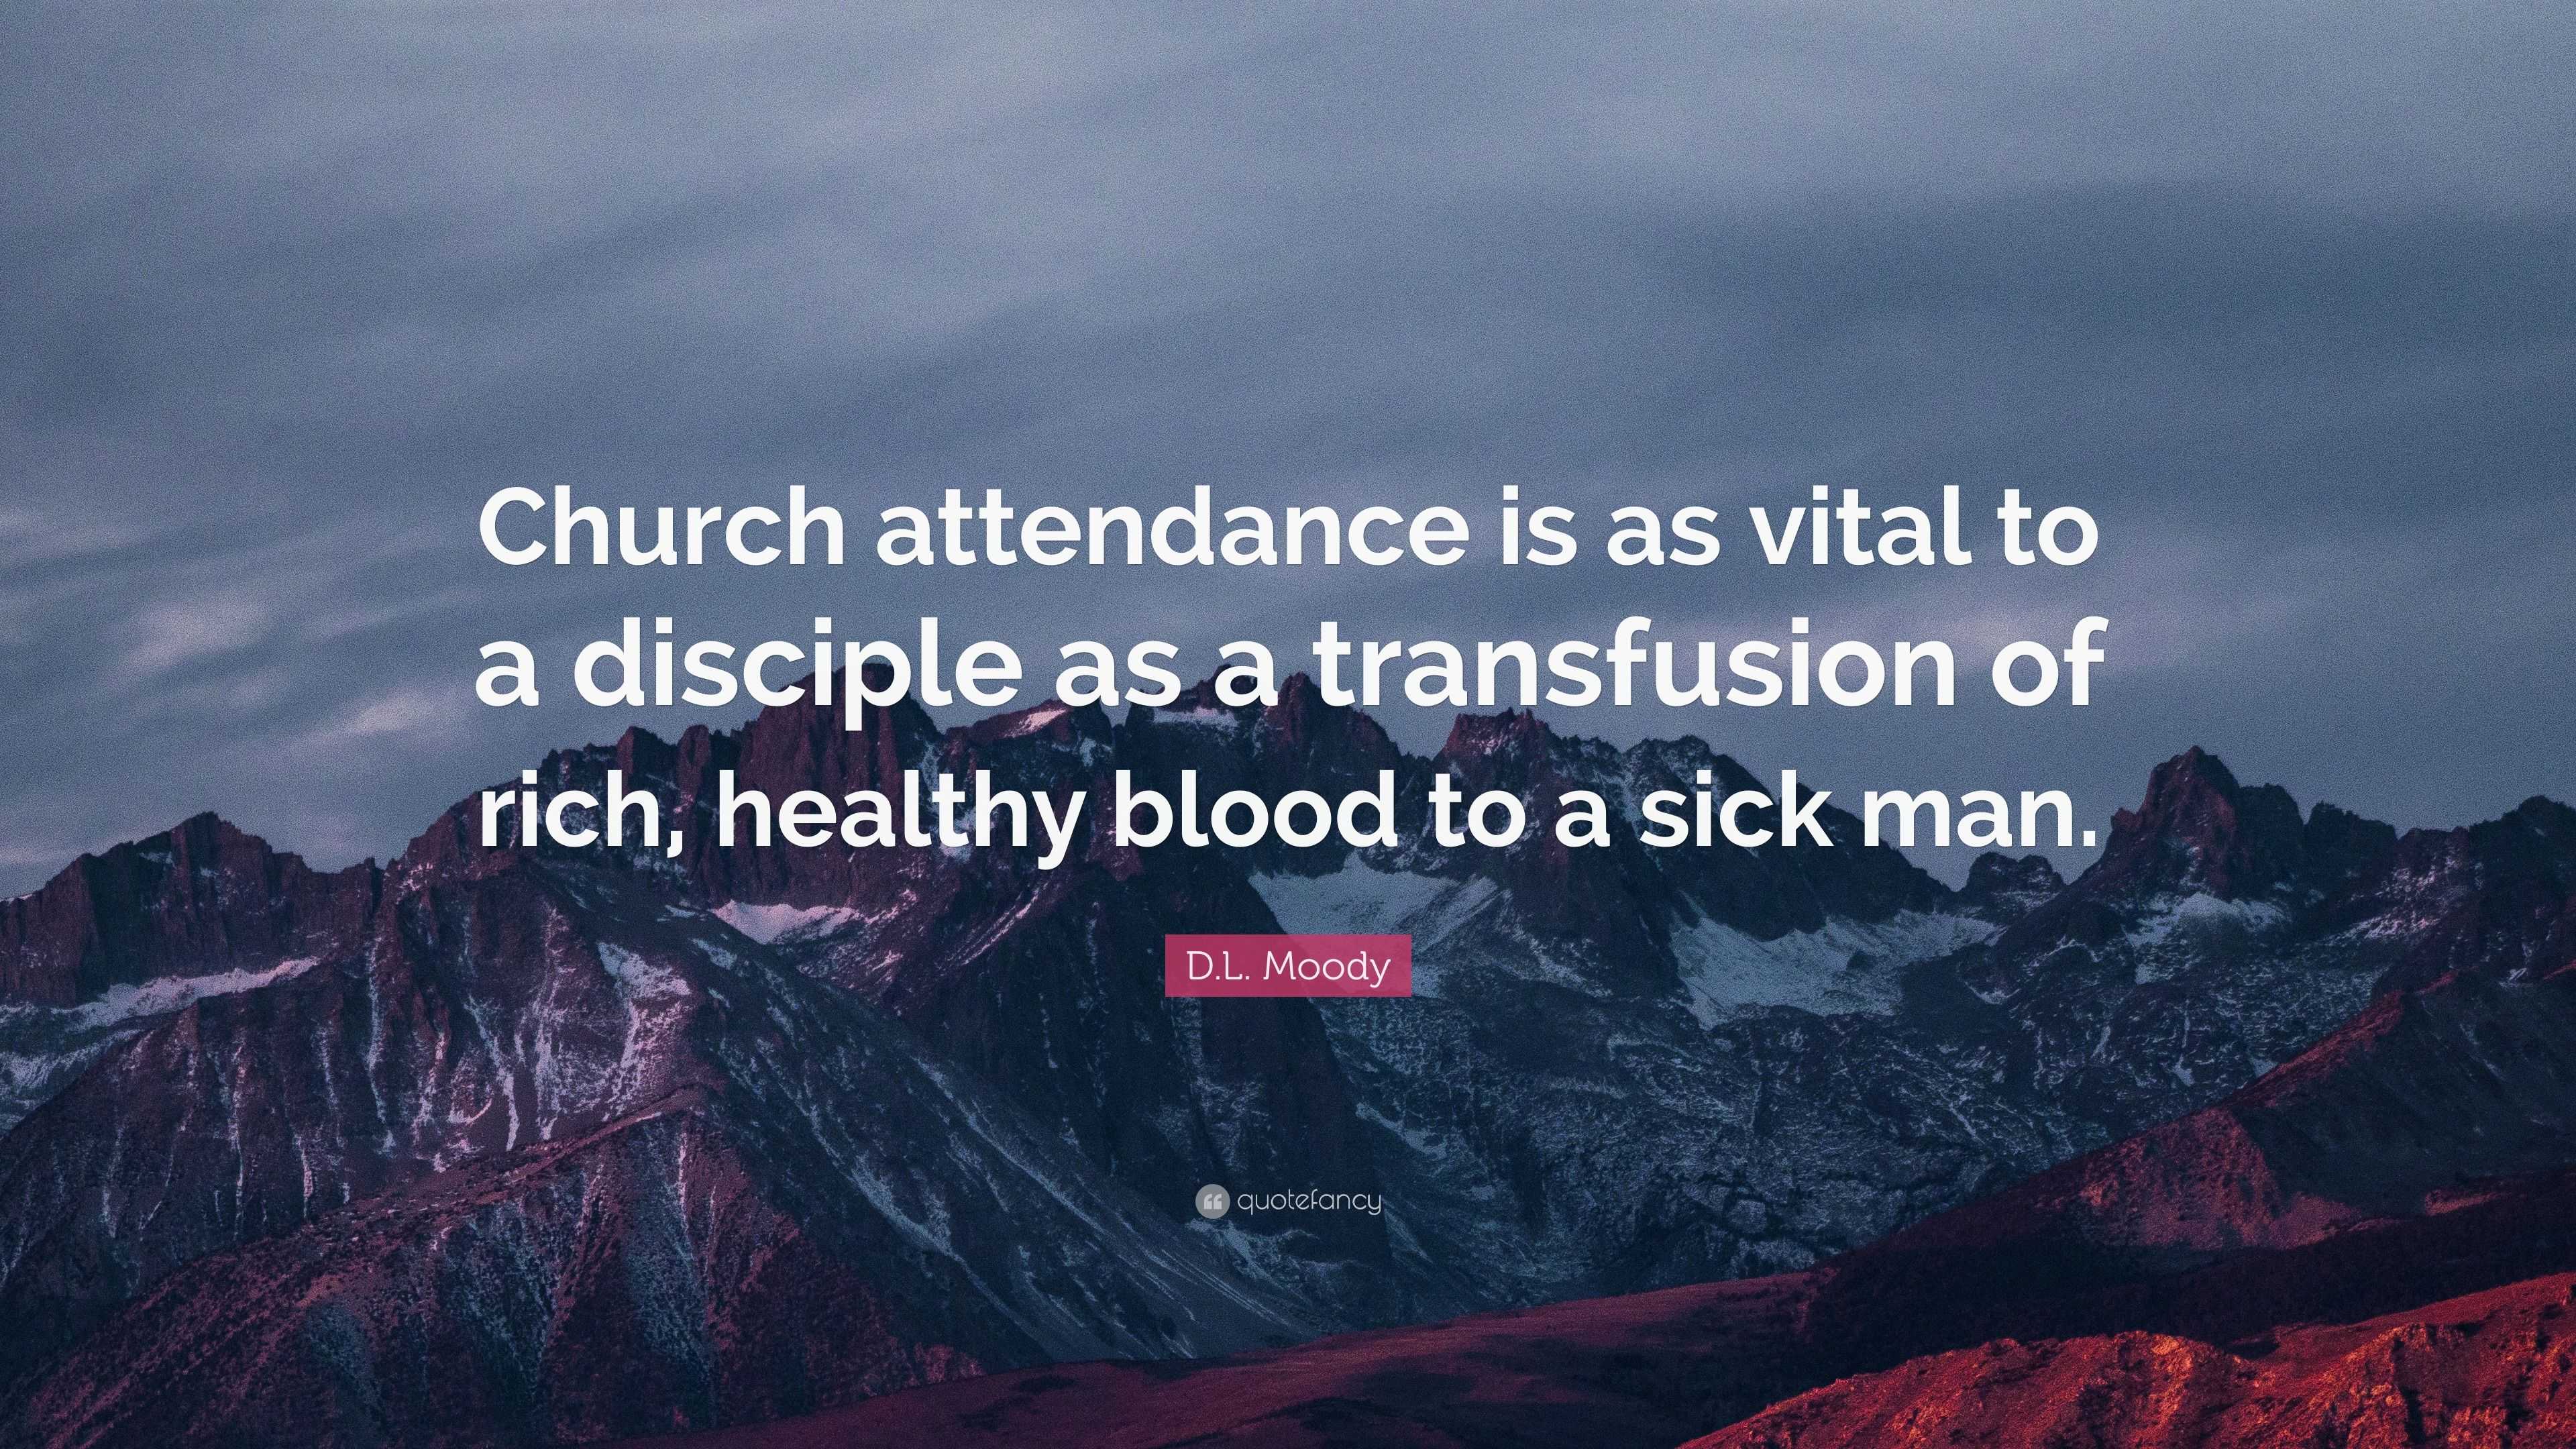 D.L. Moody Quote: “Church attendance is as vital to a disciple as a ...